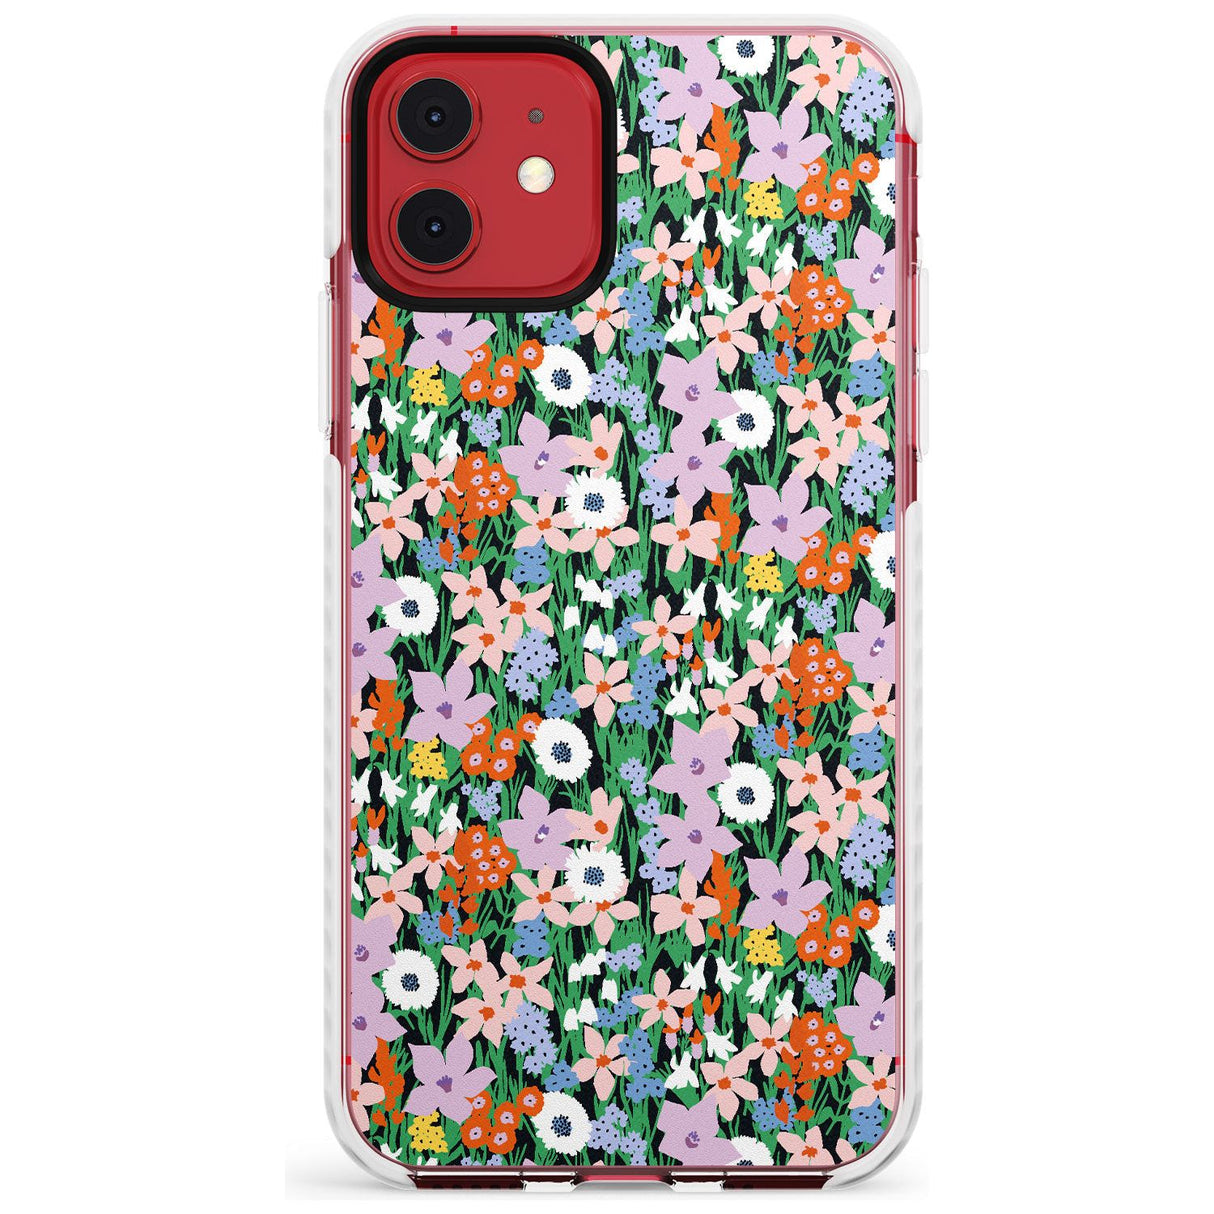 Jazzy Floral Mix: Solid Slim TPU Phone Case for iPhone 11